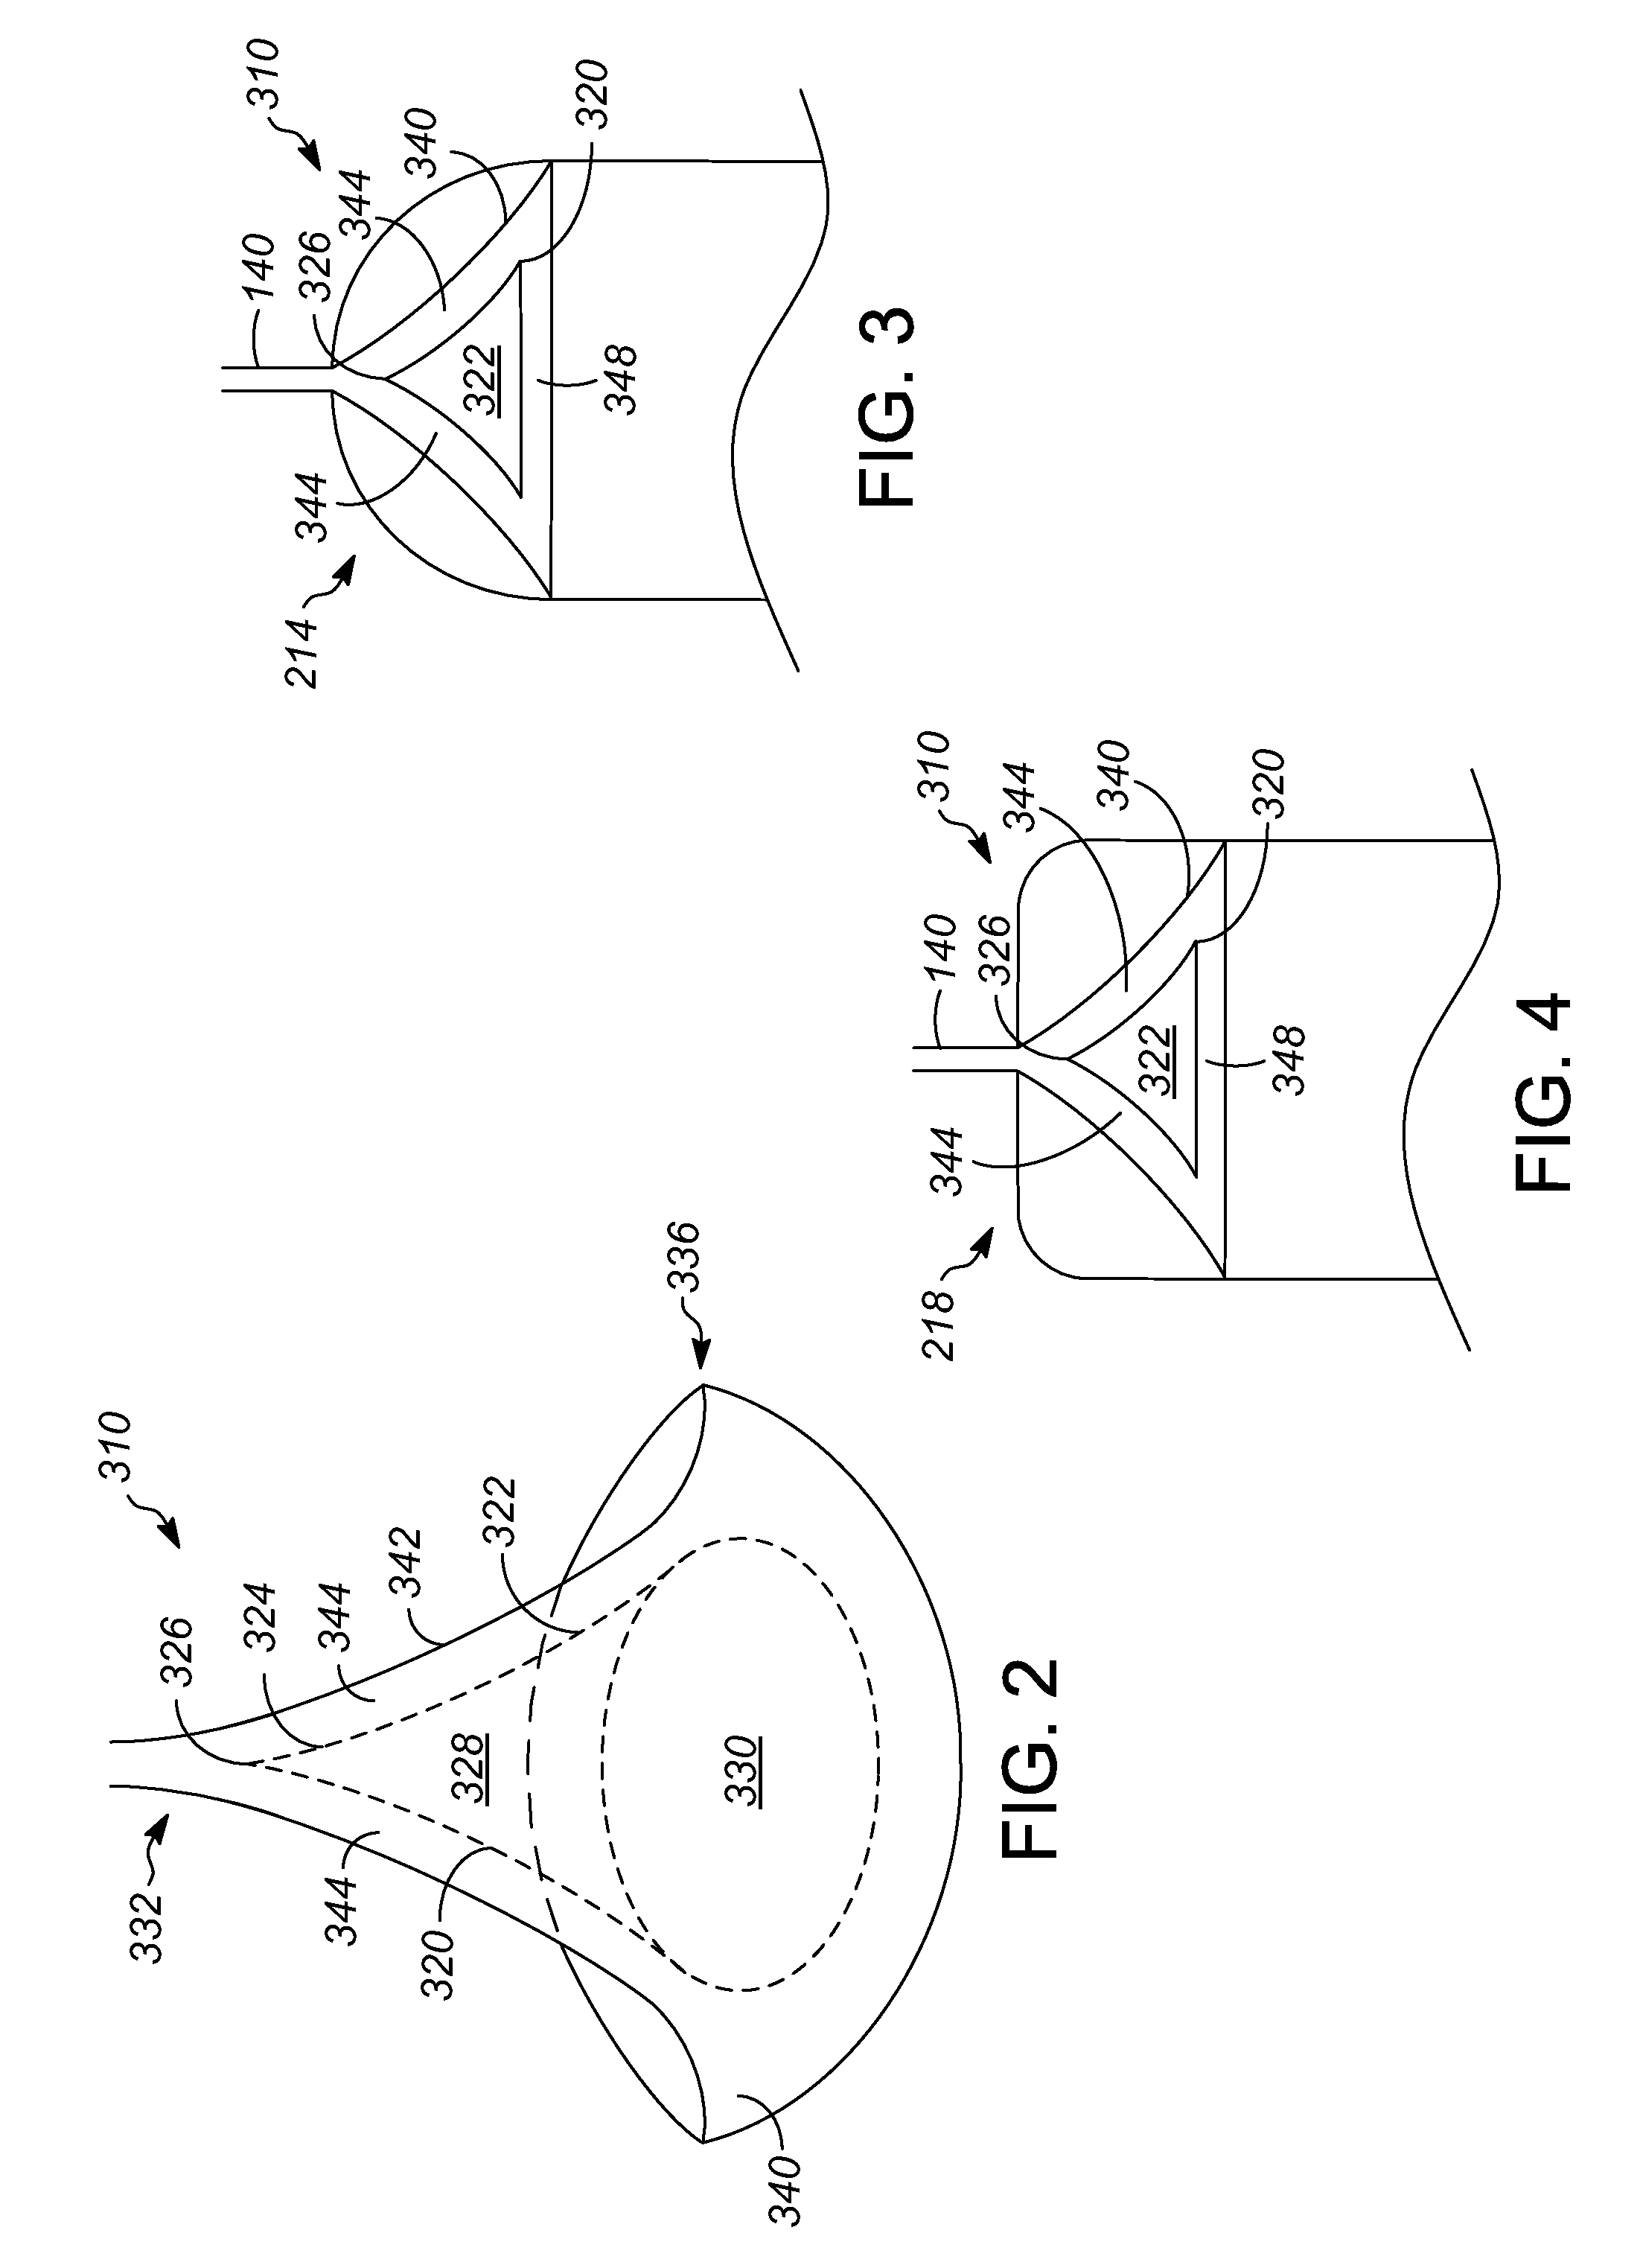 Vessel, system, and process for minimizing unequal flow distribution